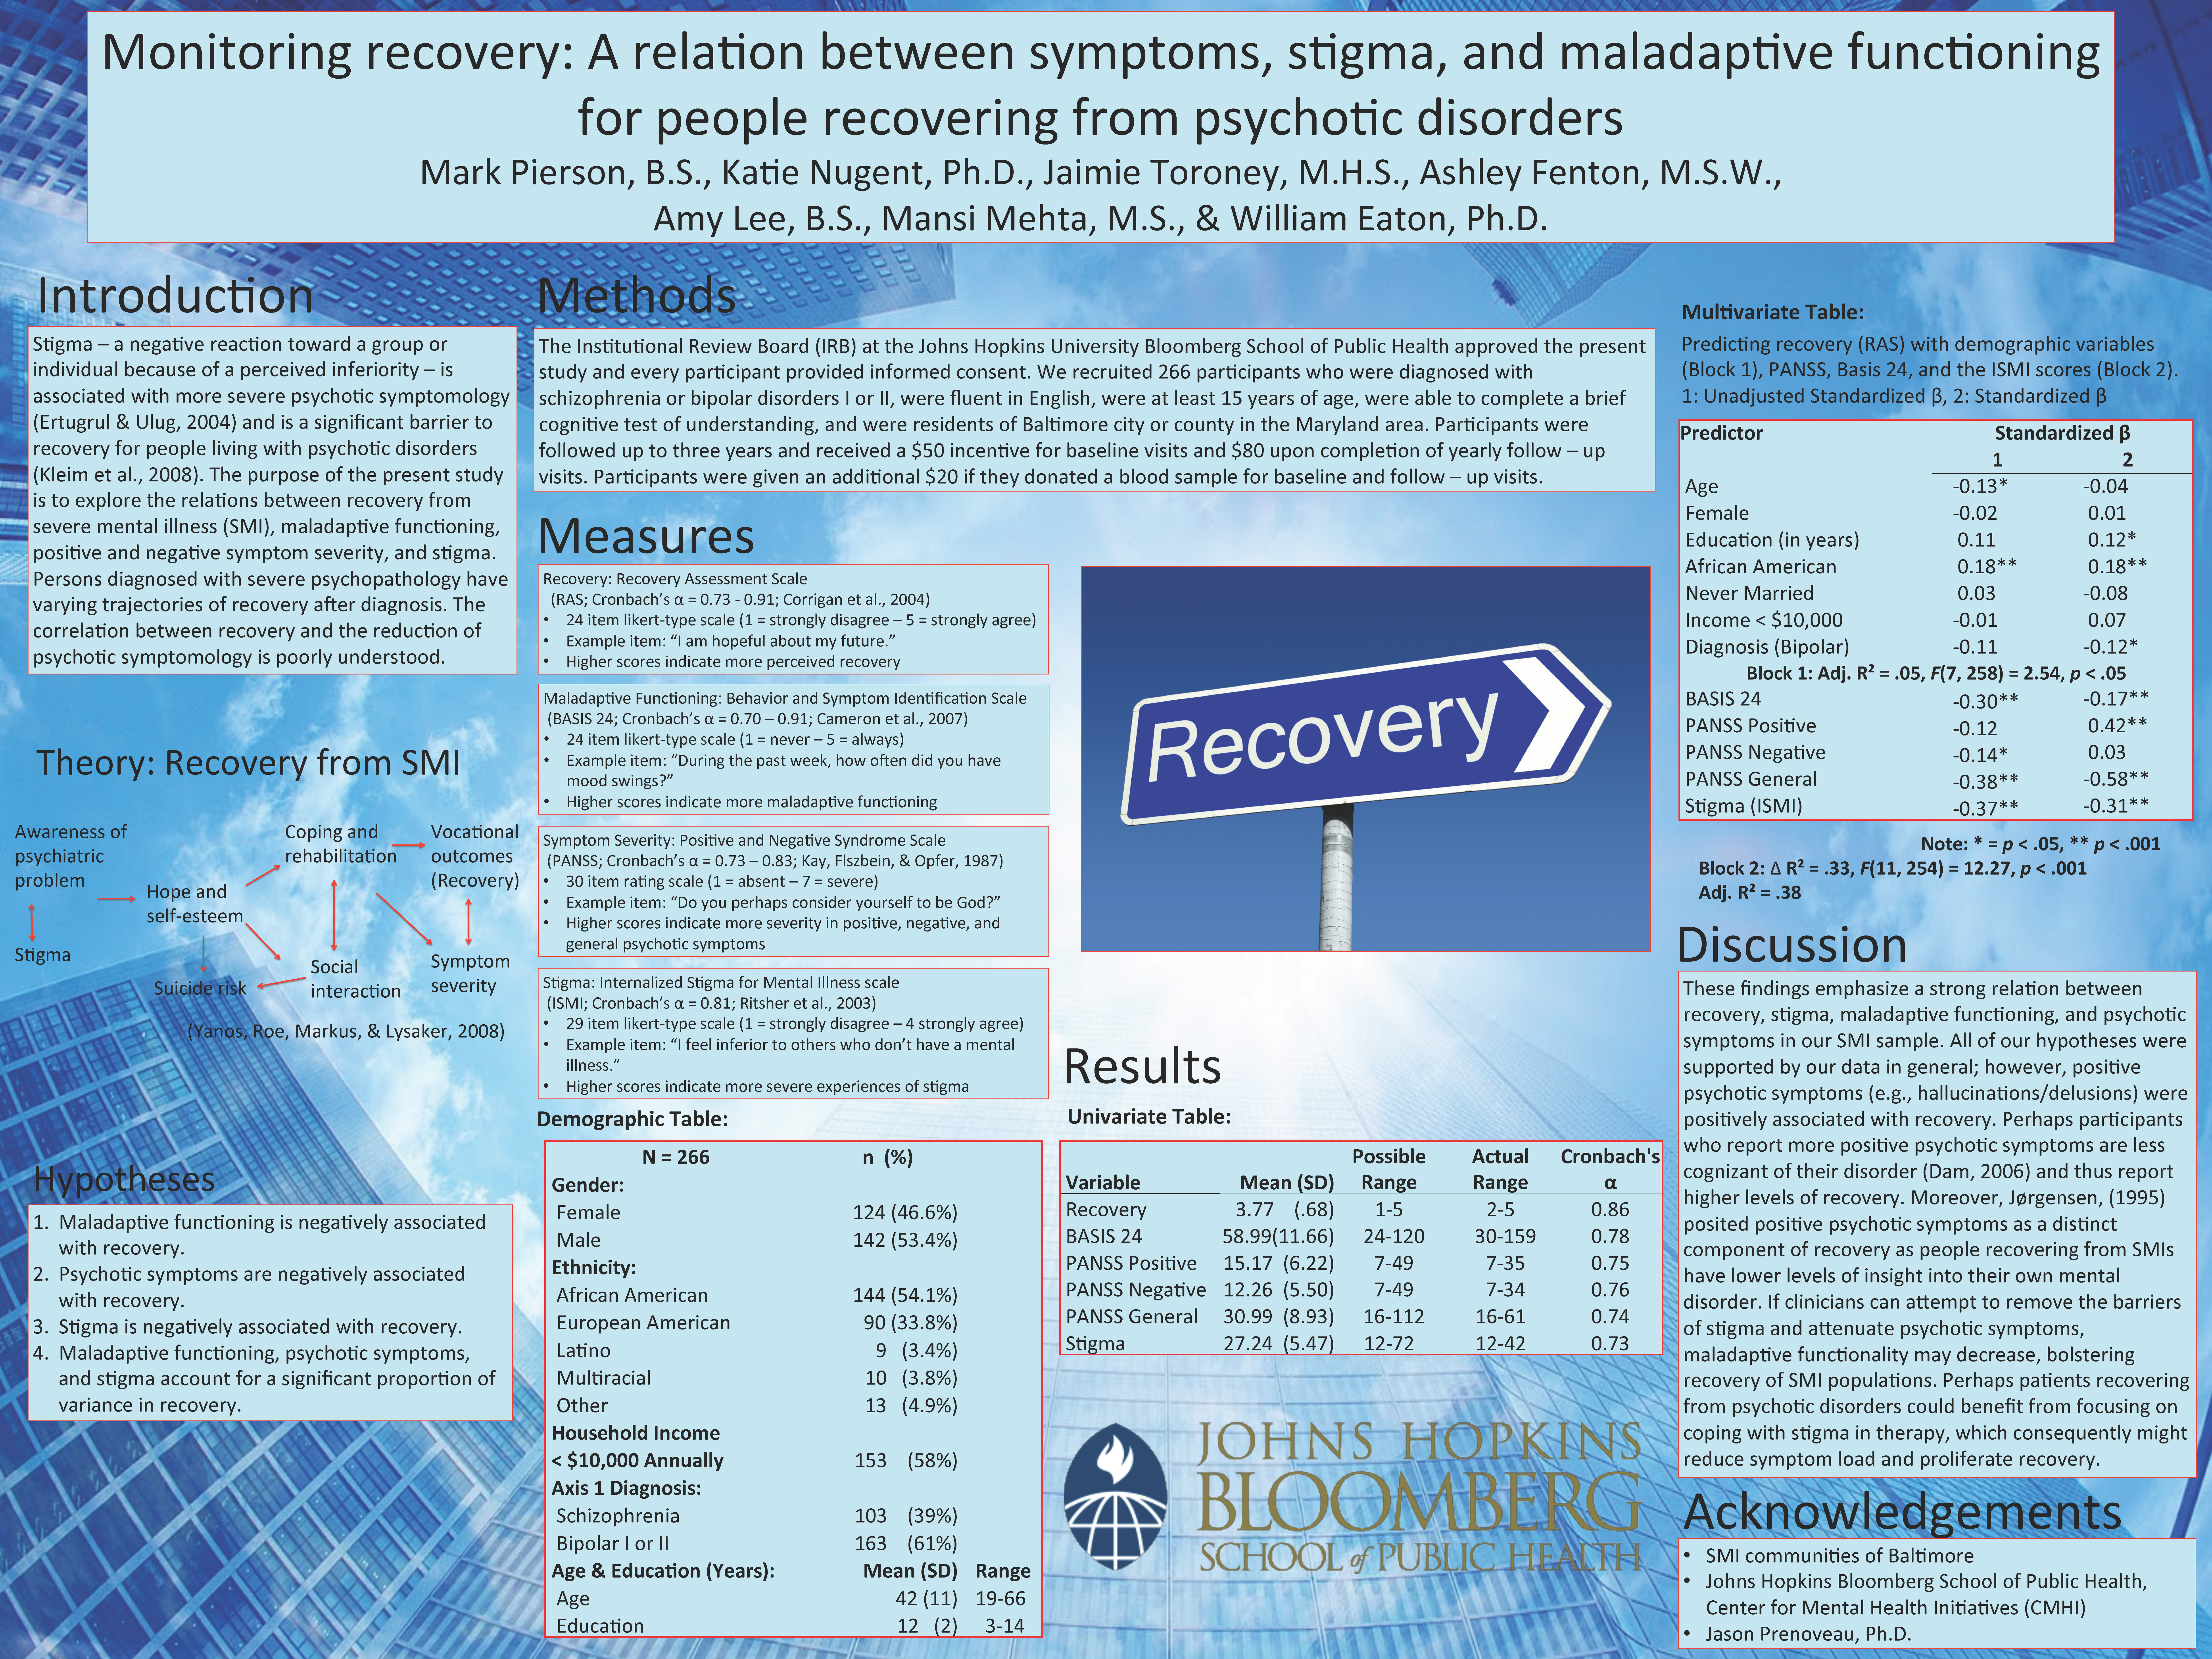 Enlarged poster image: Monitoring recovery: A relation between symptoms, stigma, and maladaptive functioning for people recovering from psychotic disorders